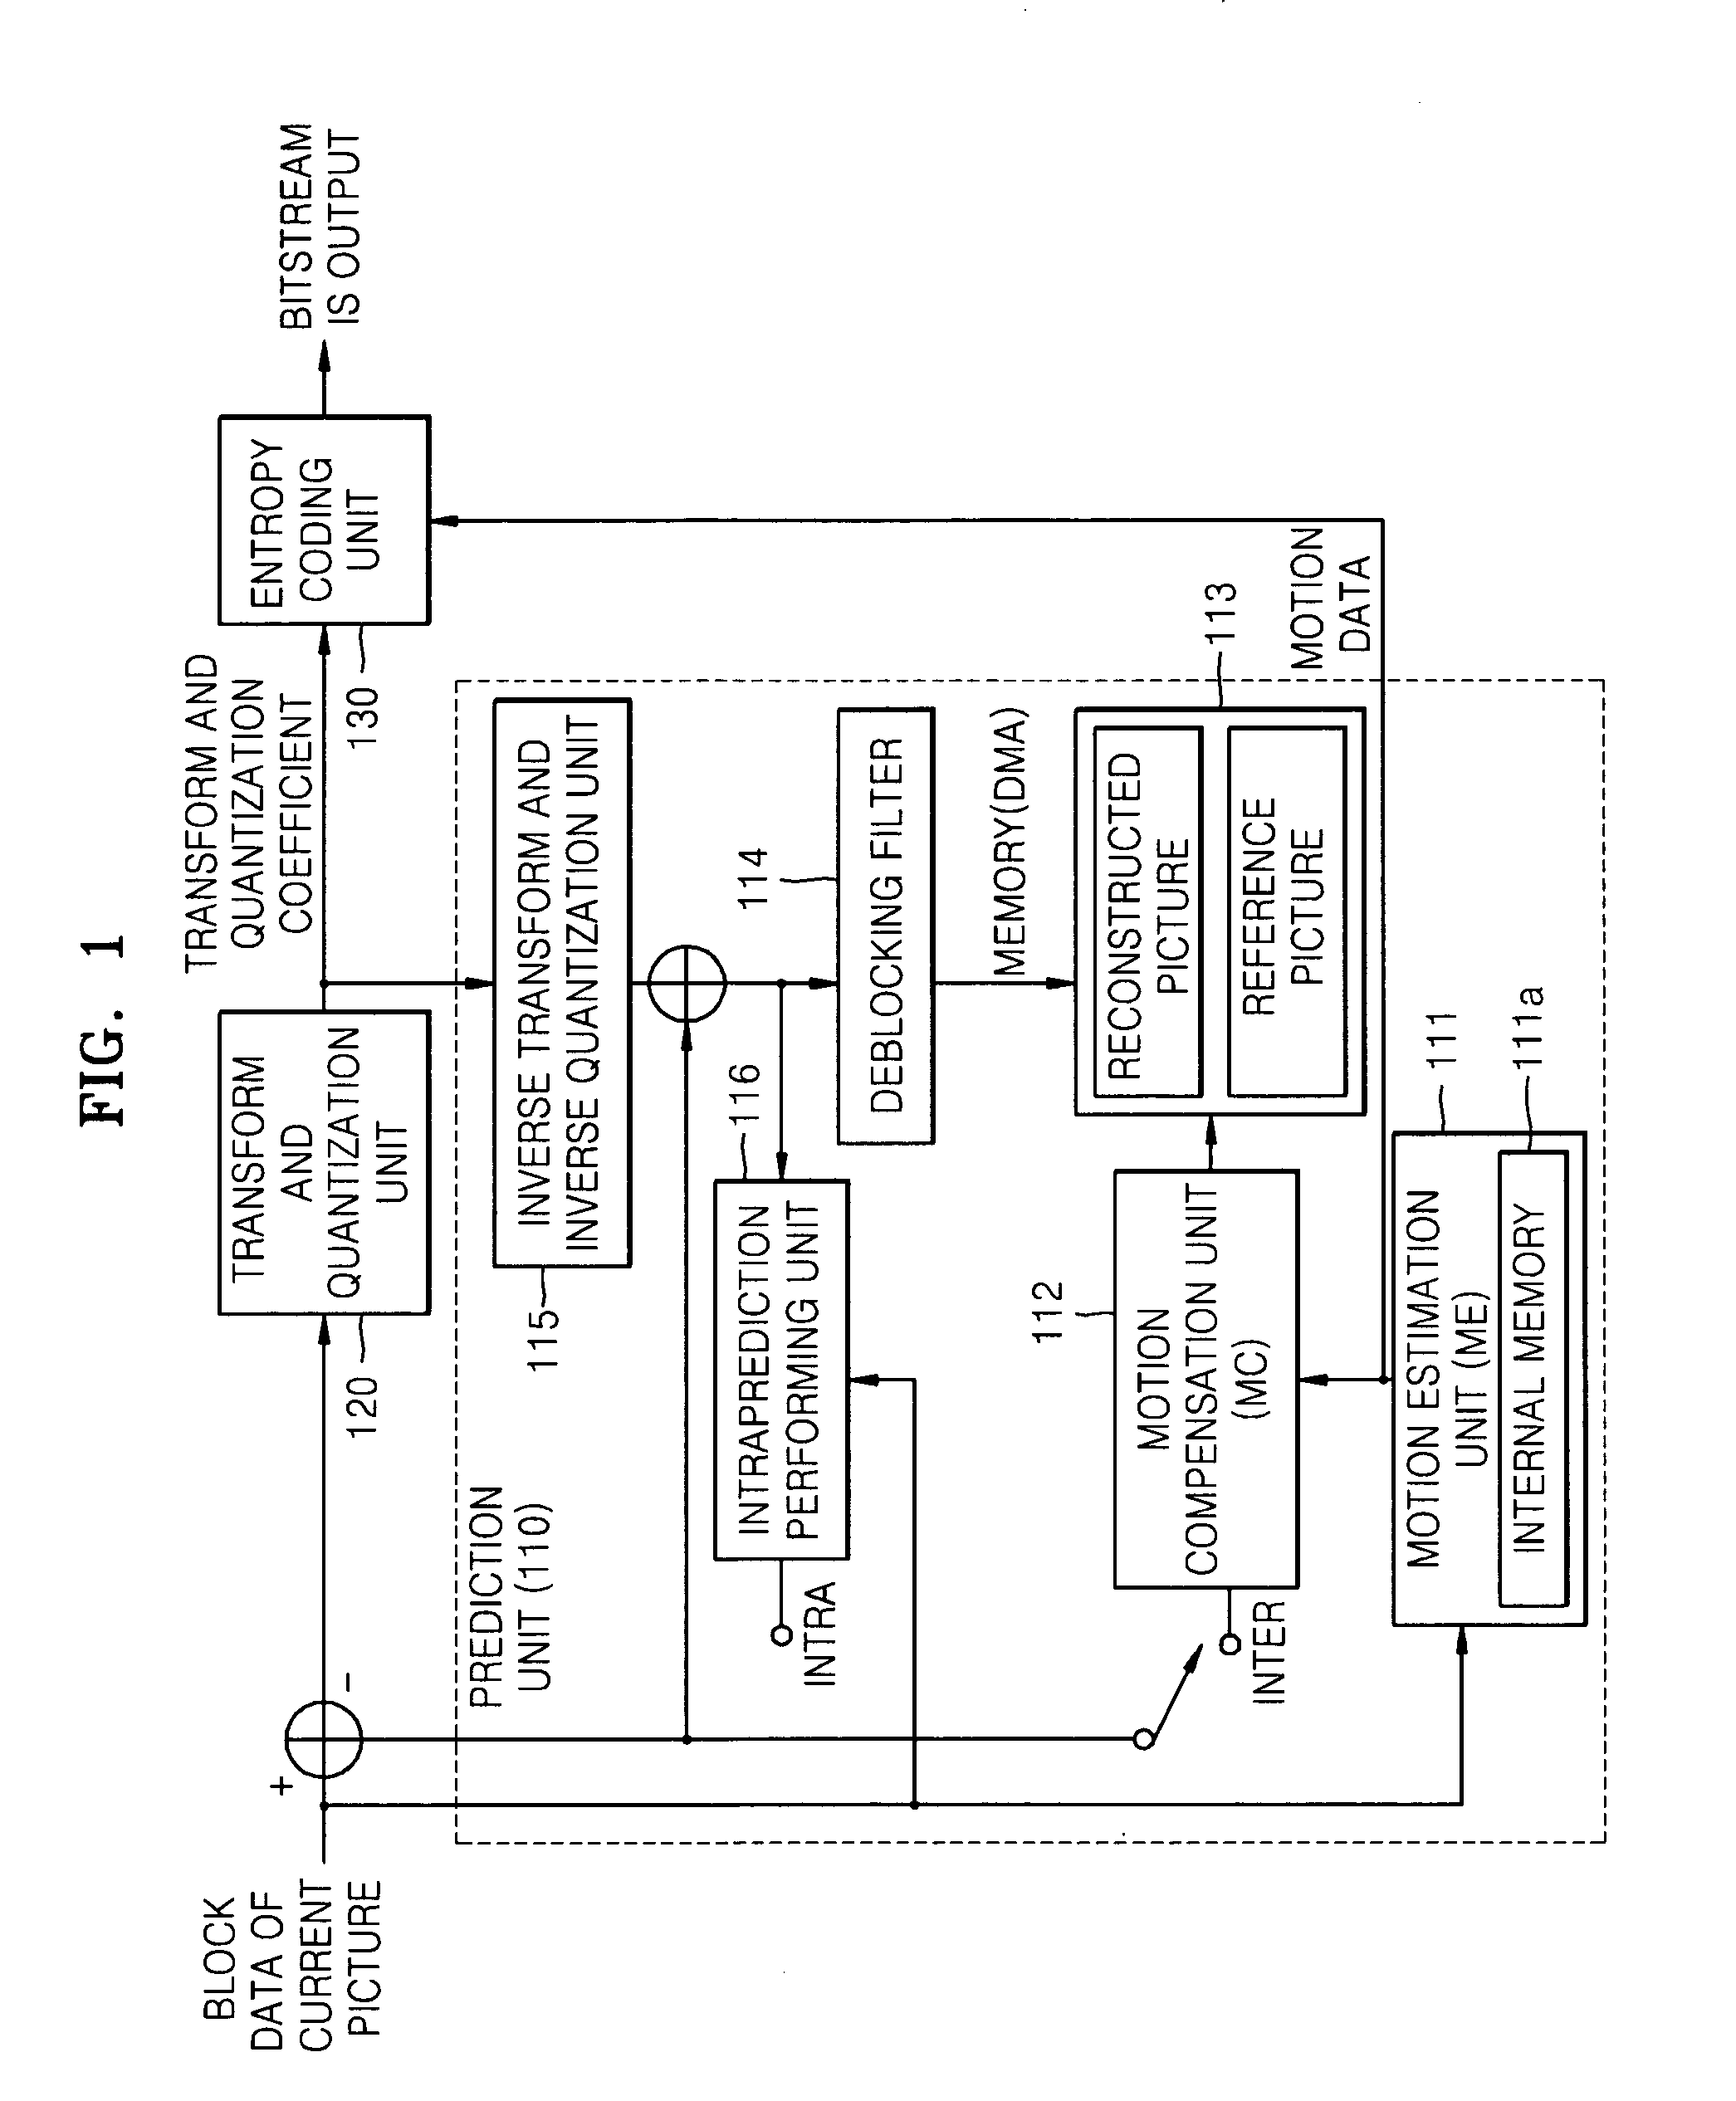 Method and apparatus for determining inter-mode in video encoding